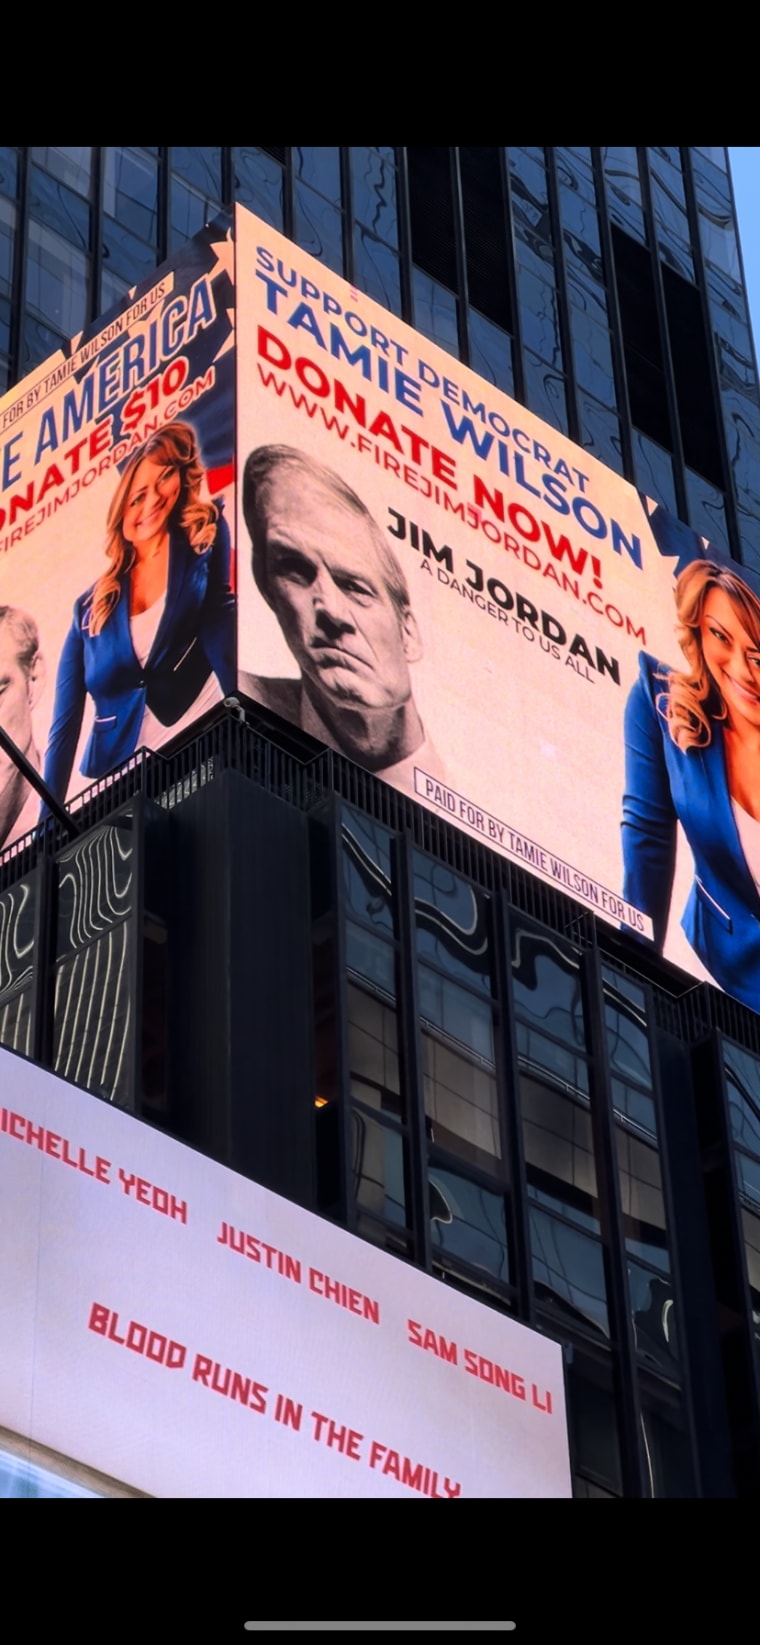 Ohio congressional candidate Tamie Wilson's Times Square billboard.